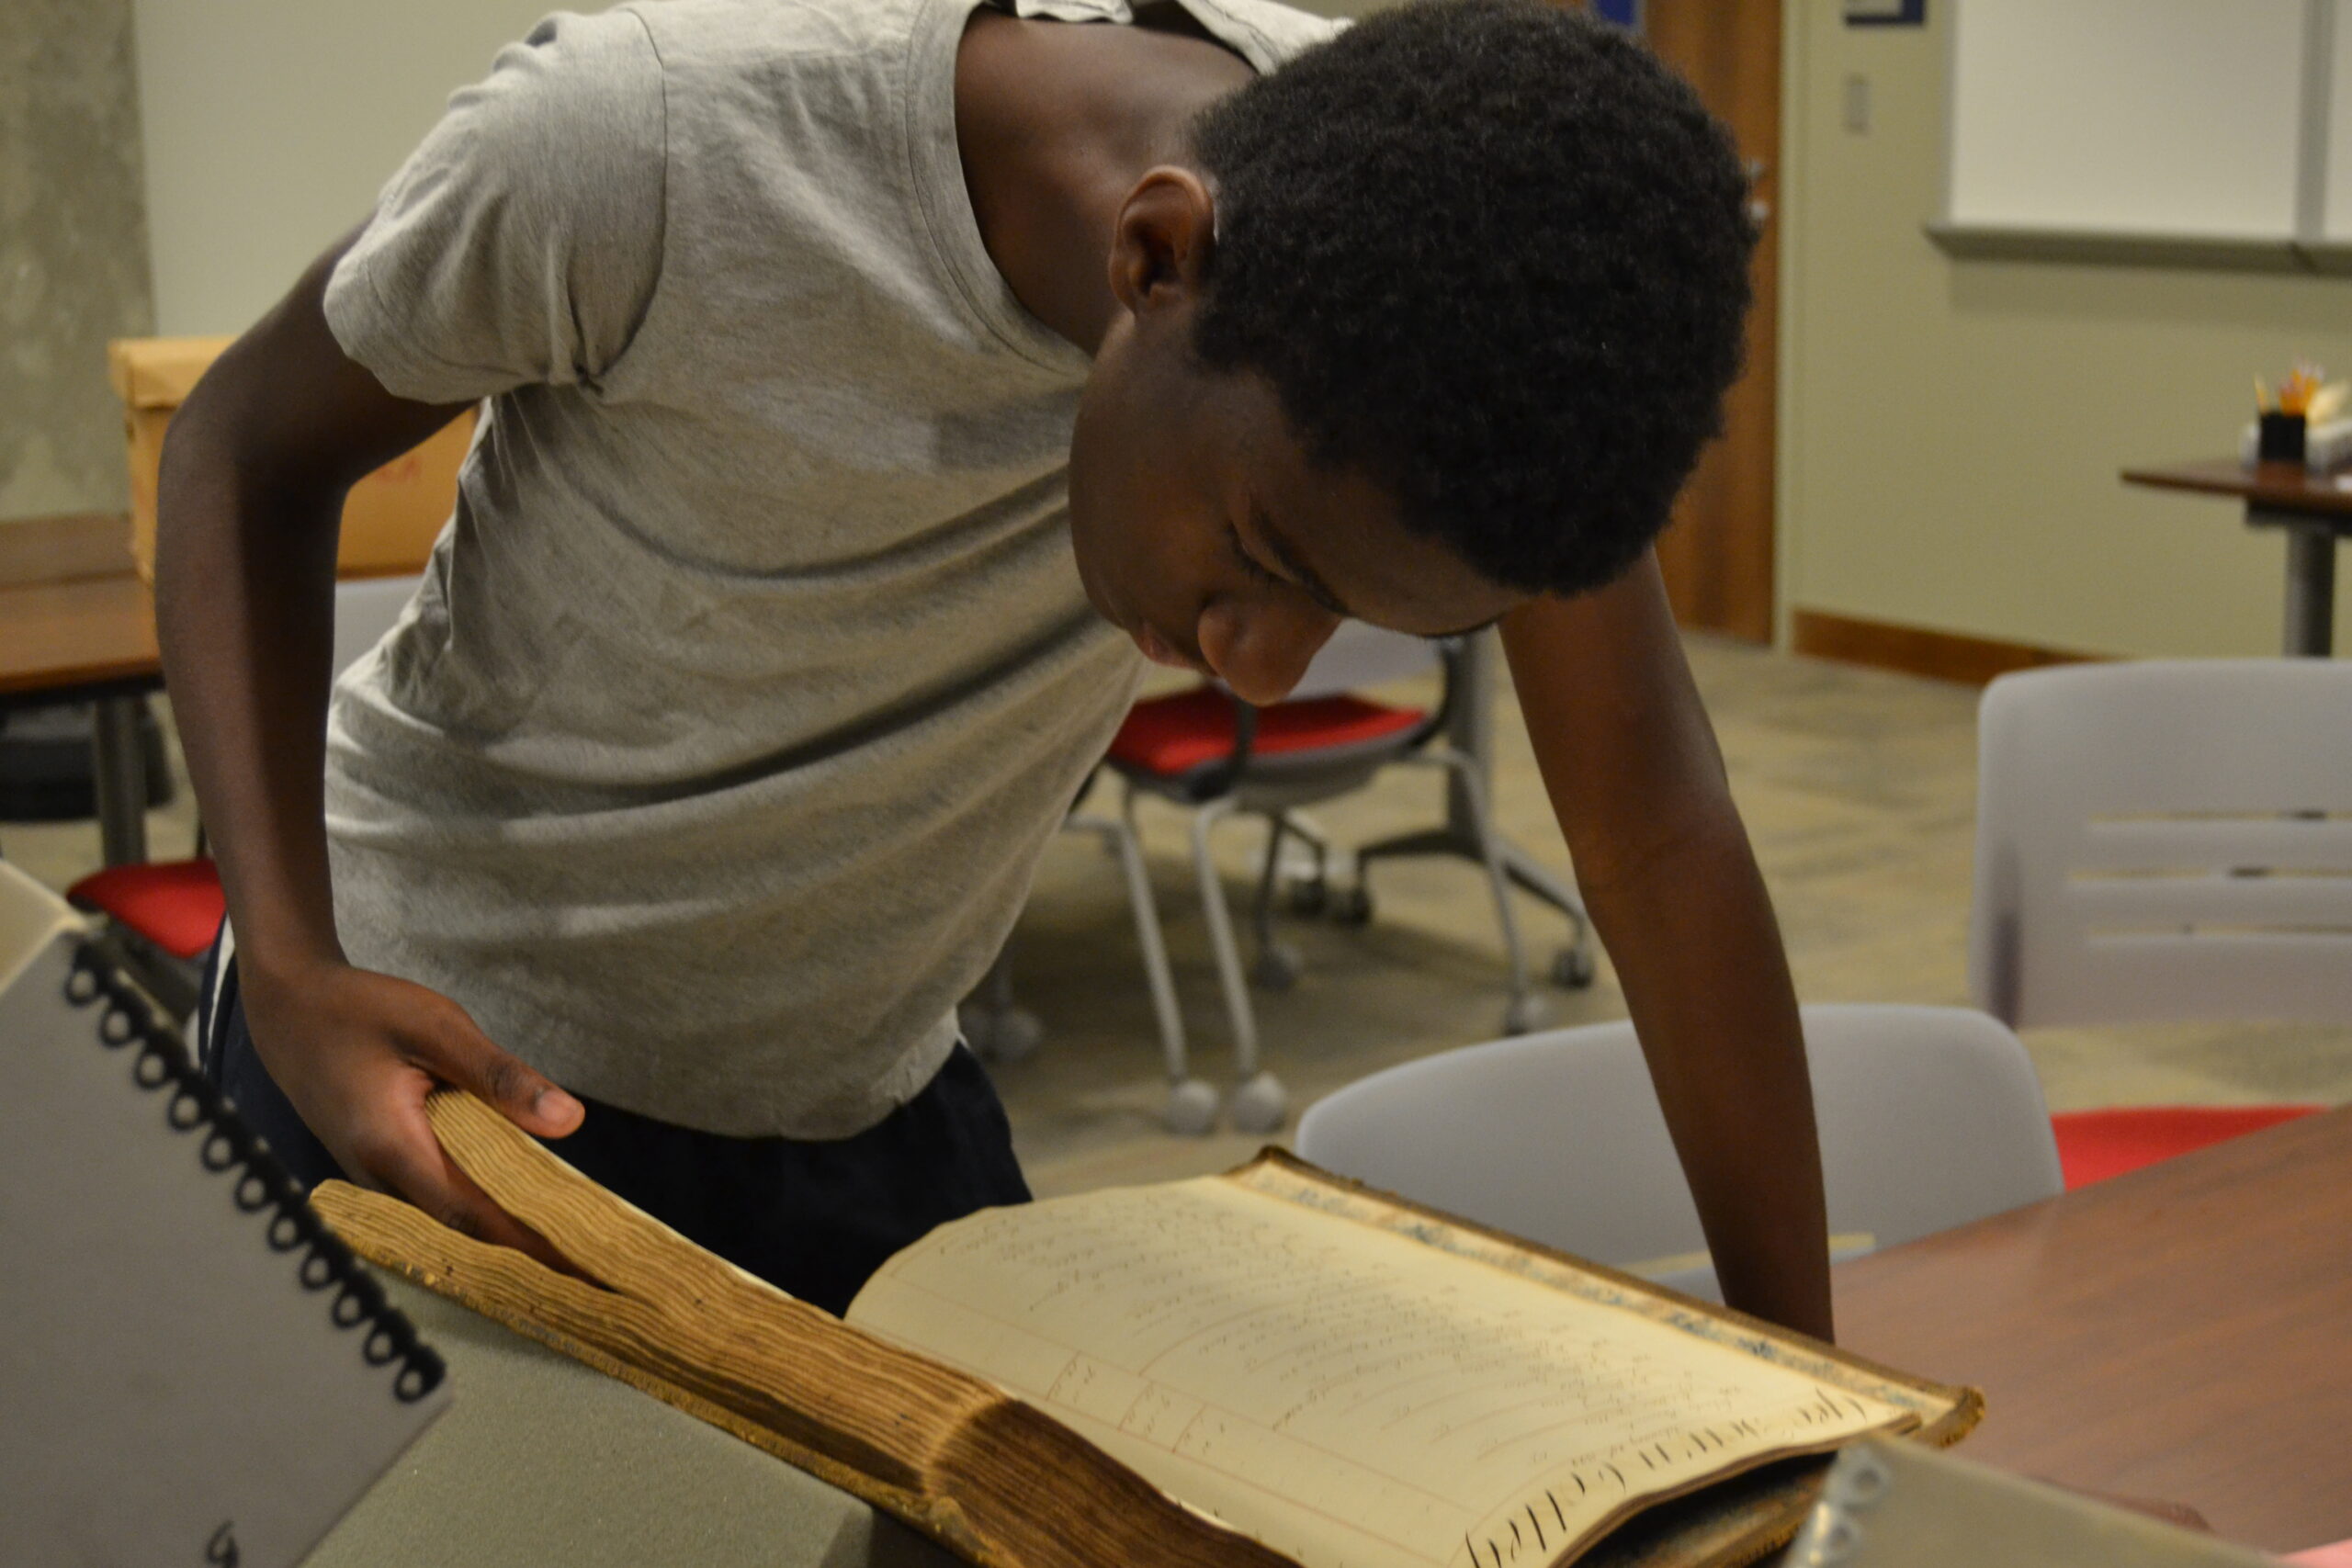 A student looks through a historical ledger in the Georgetown University archives.